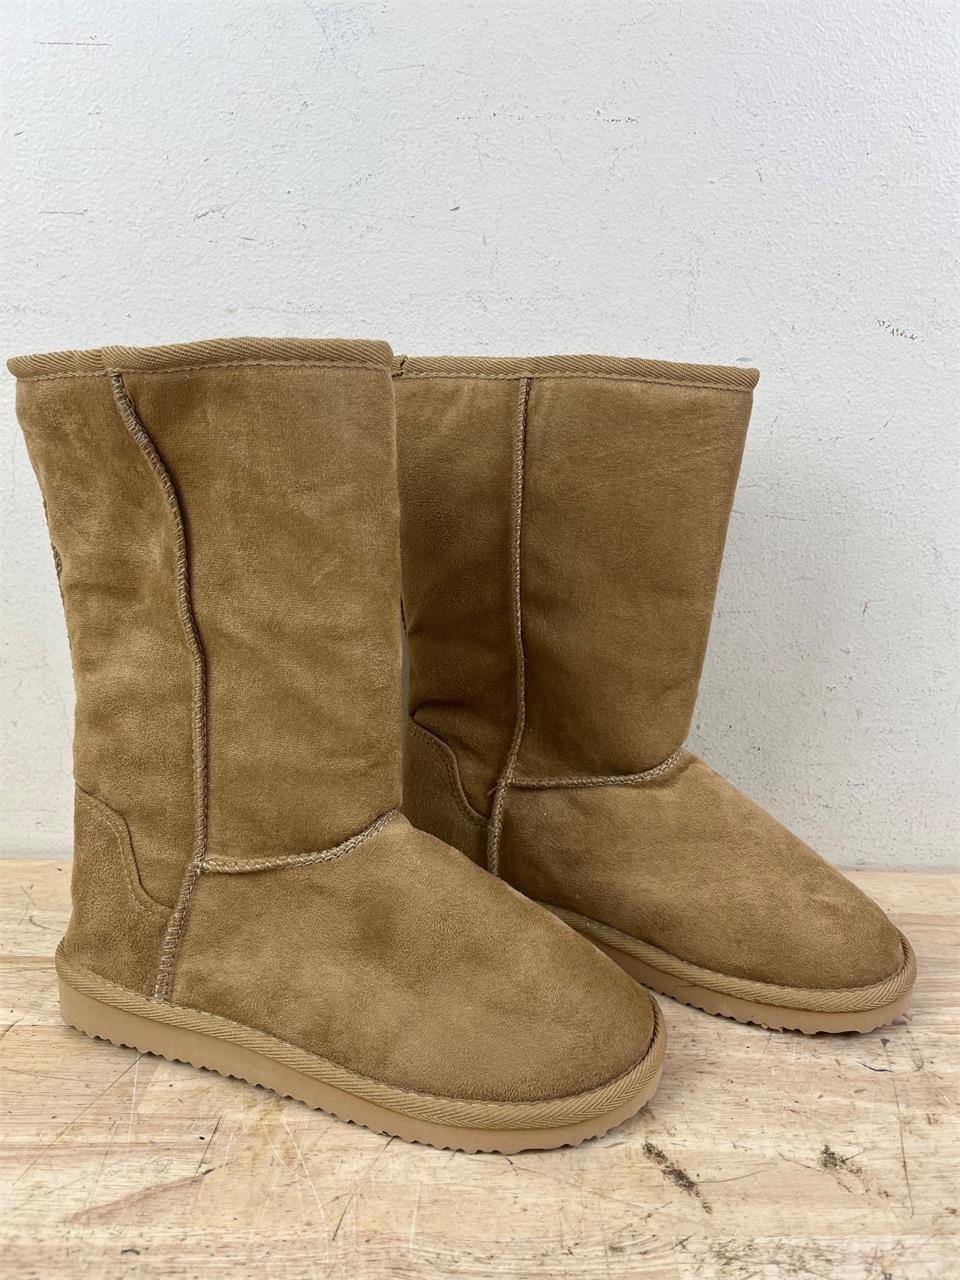 new women’s size 7 boots -no brand